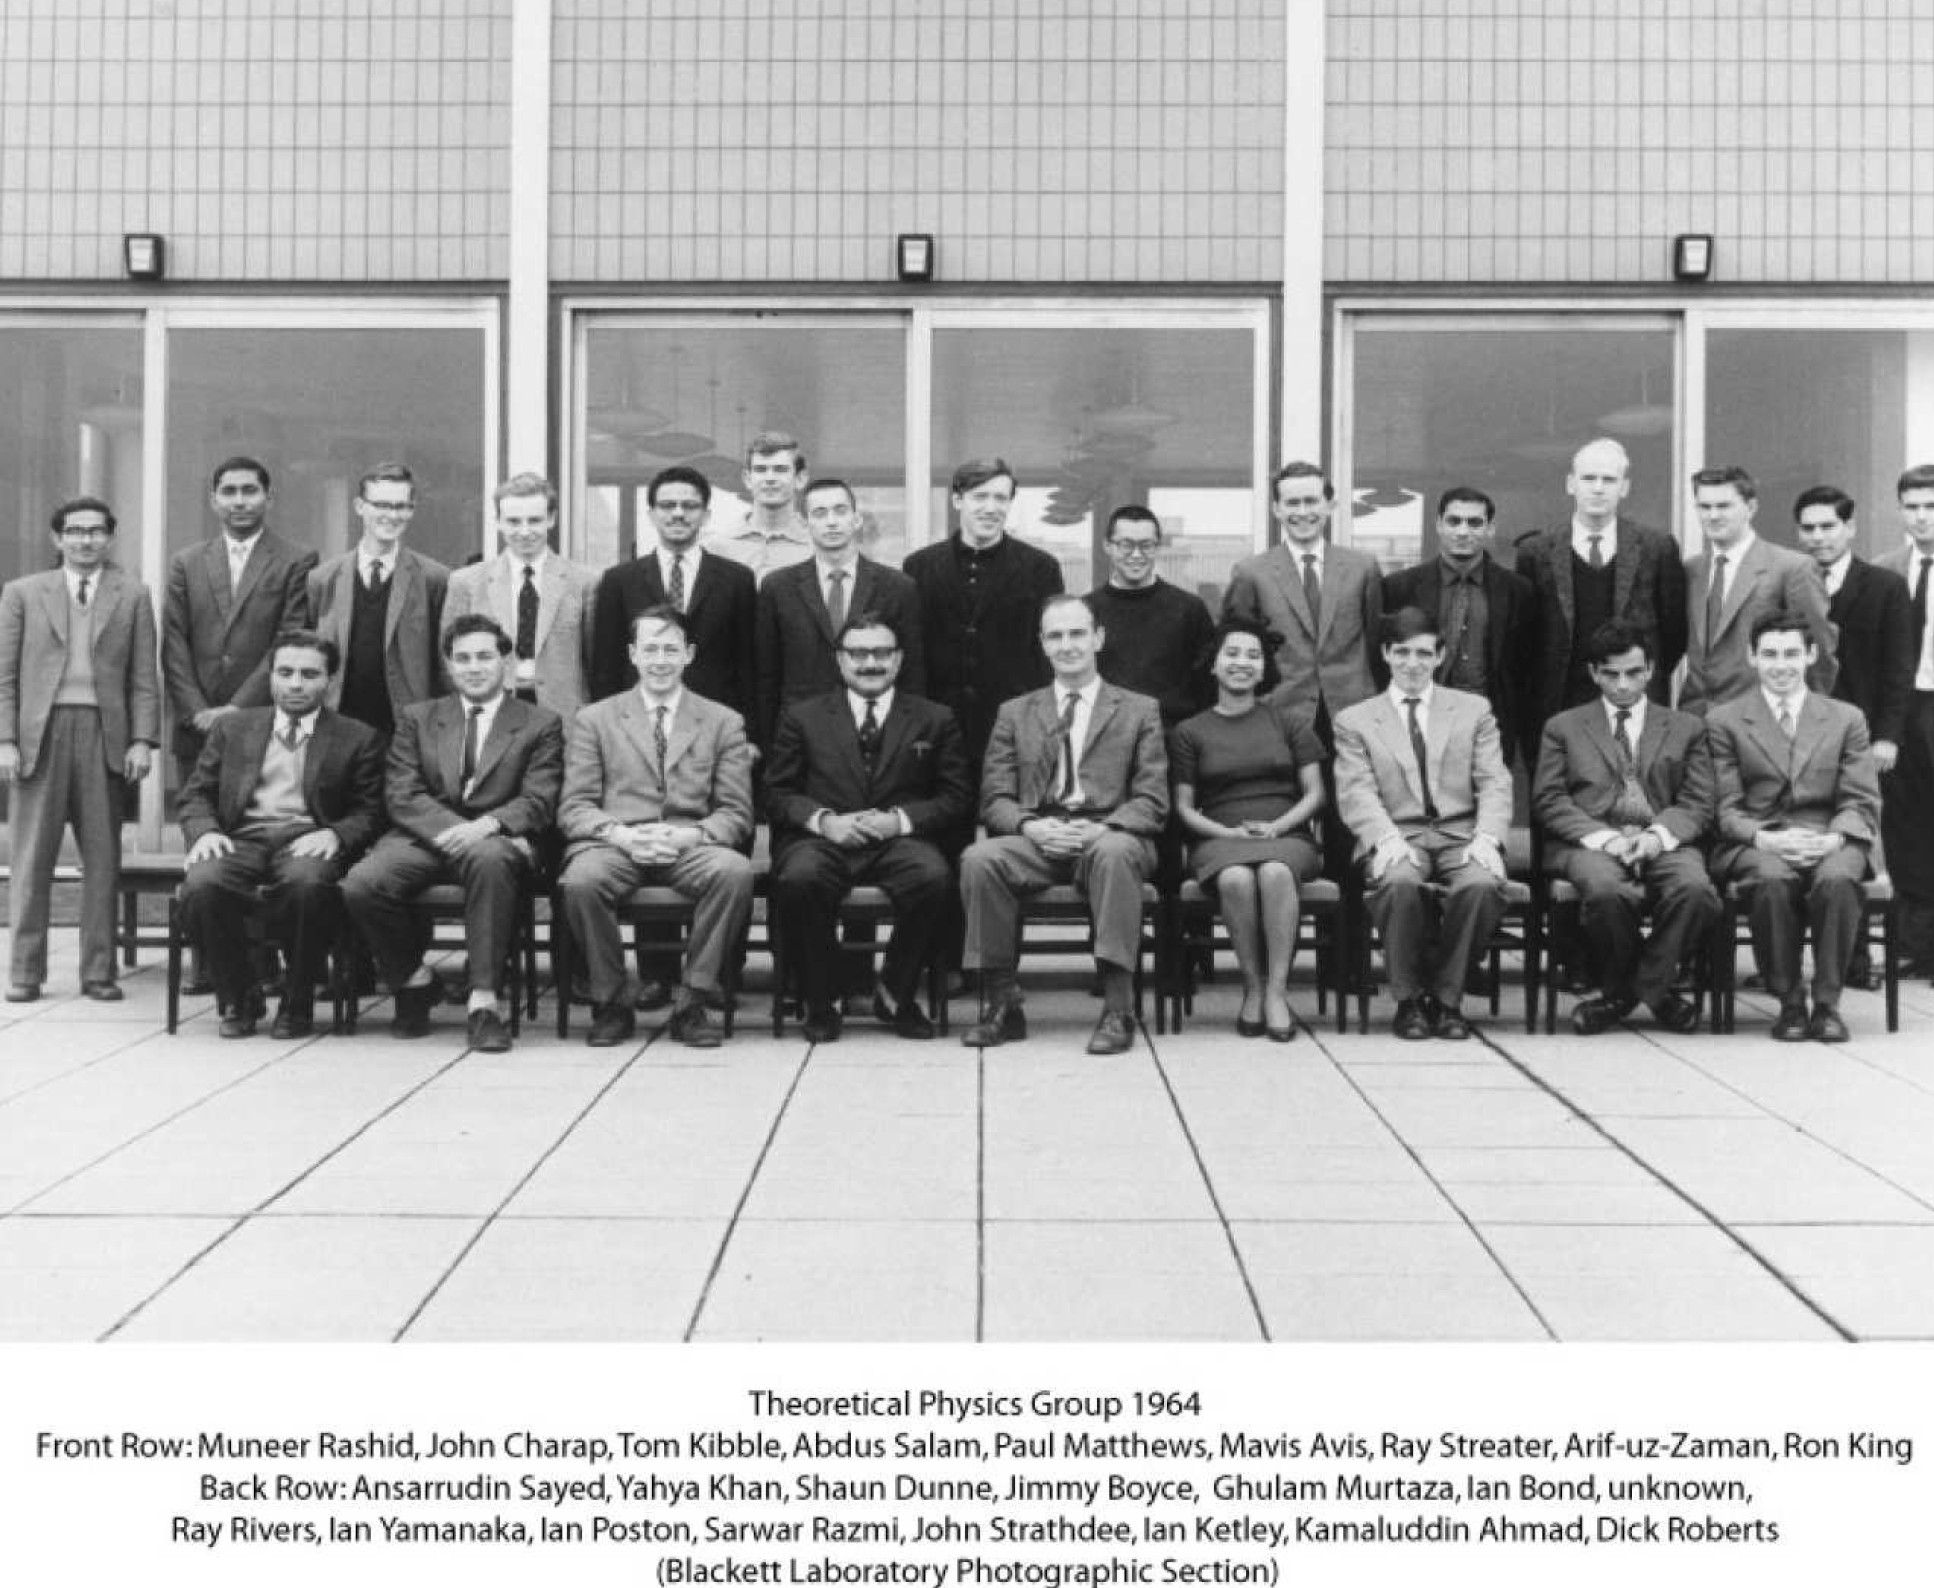 The Theoretical Physics group in 1964, with Salam at the front